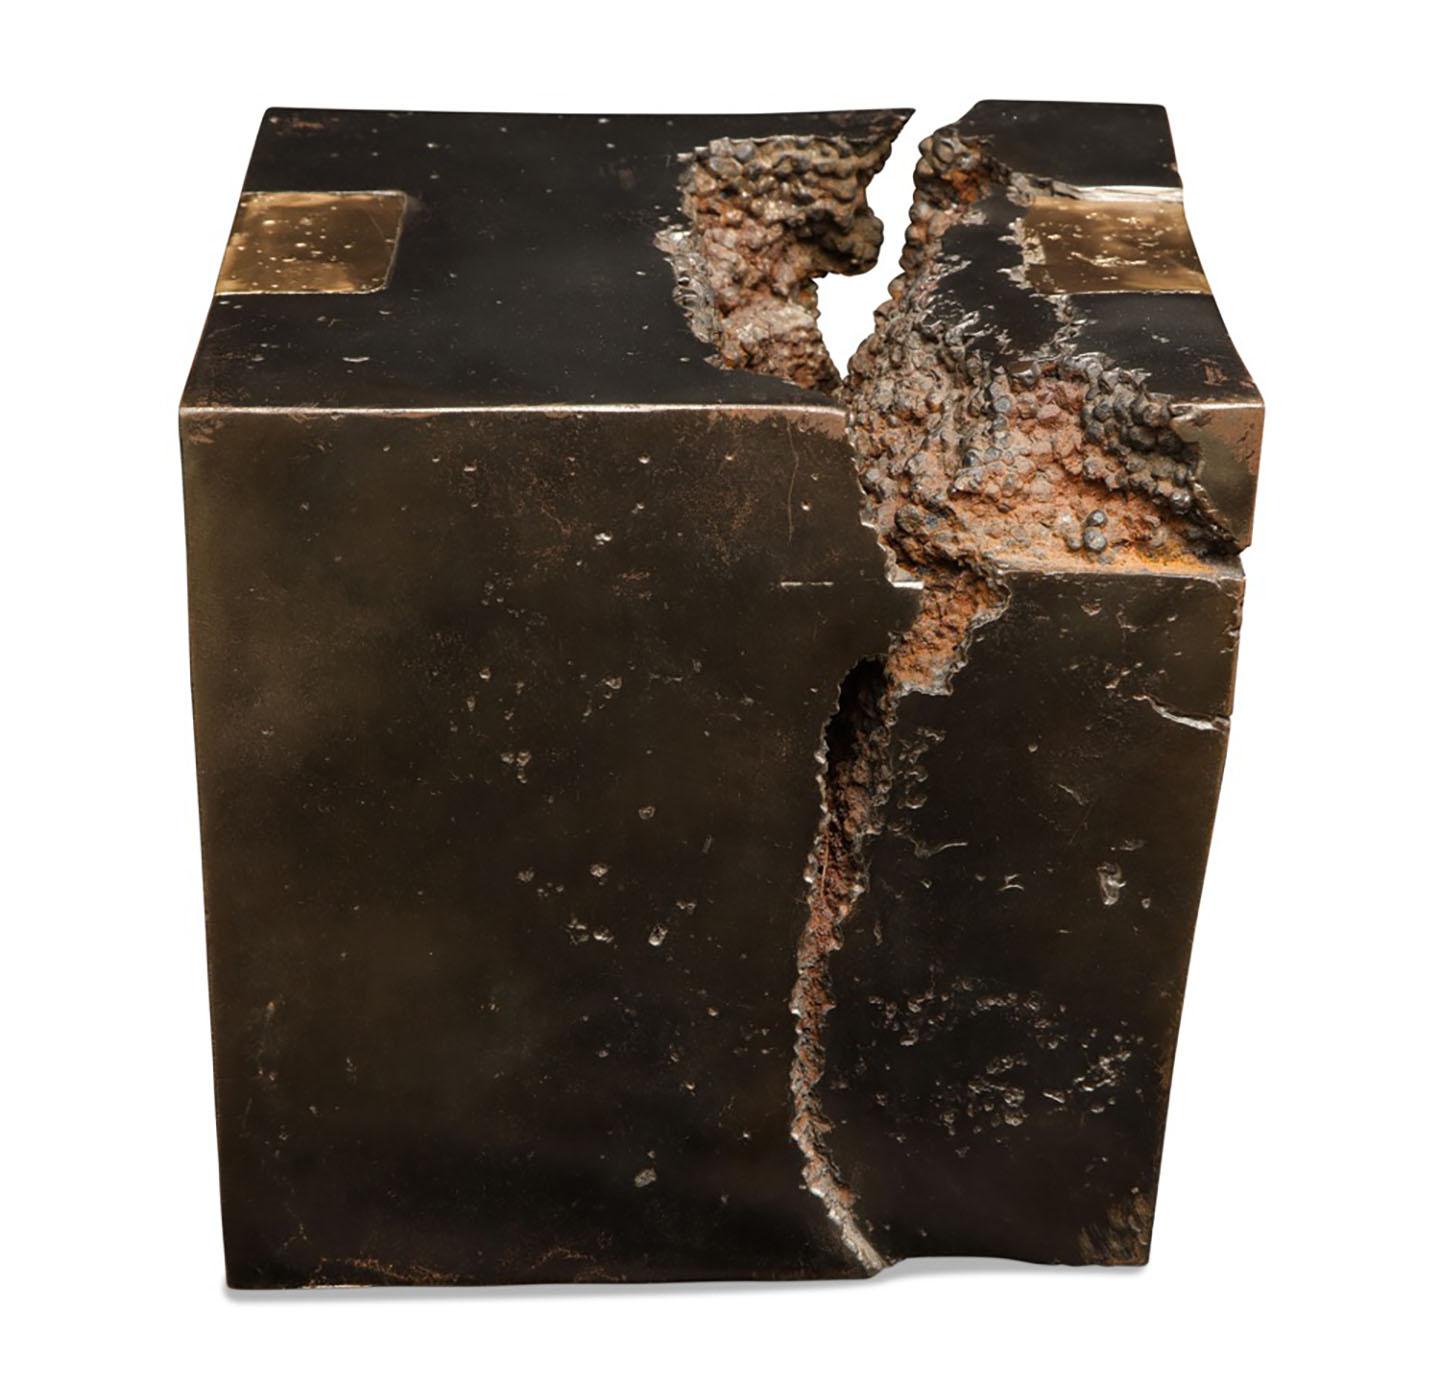 Bronze, “Pirkkala Cube”, 1999

Lost wax cast iron and bronze

By, Jay Wholley.